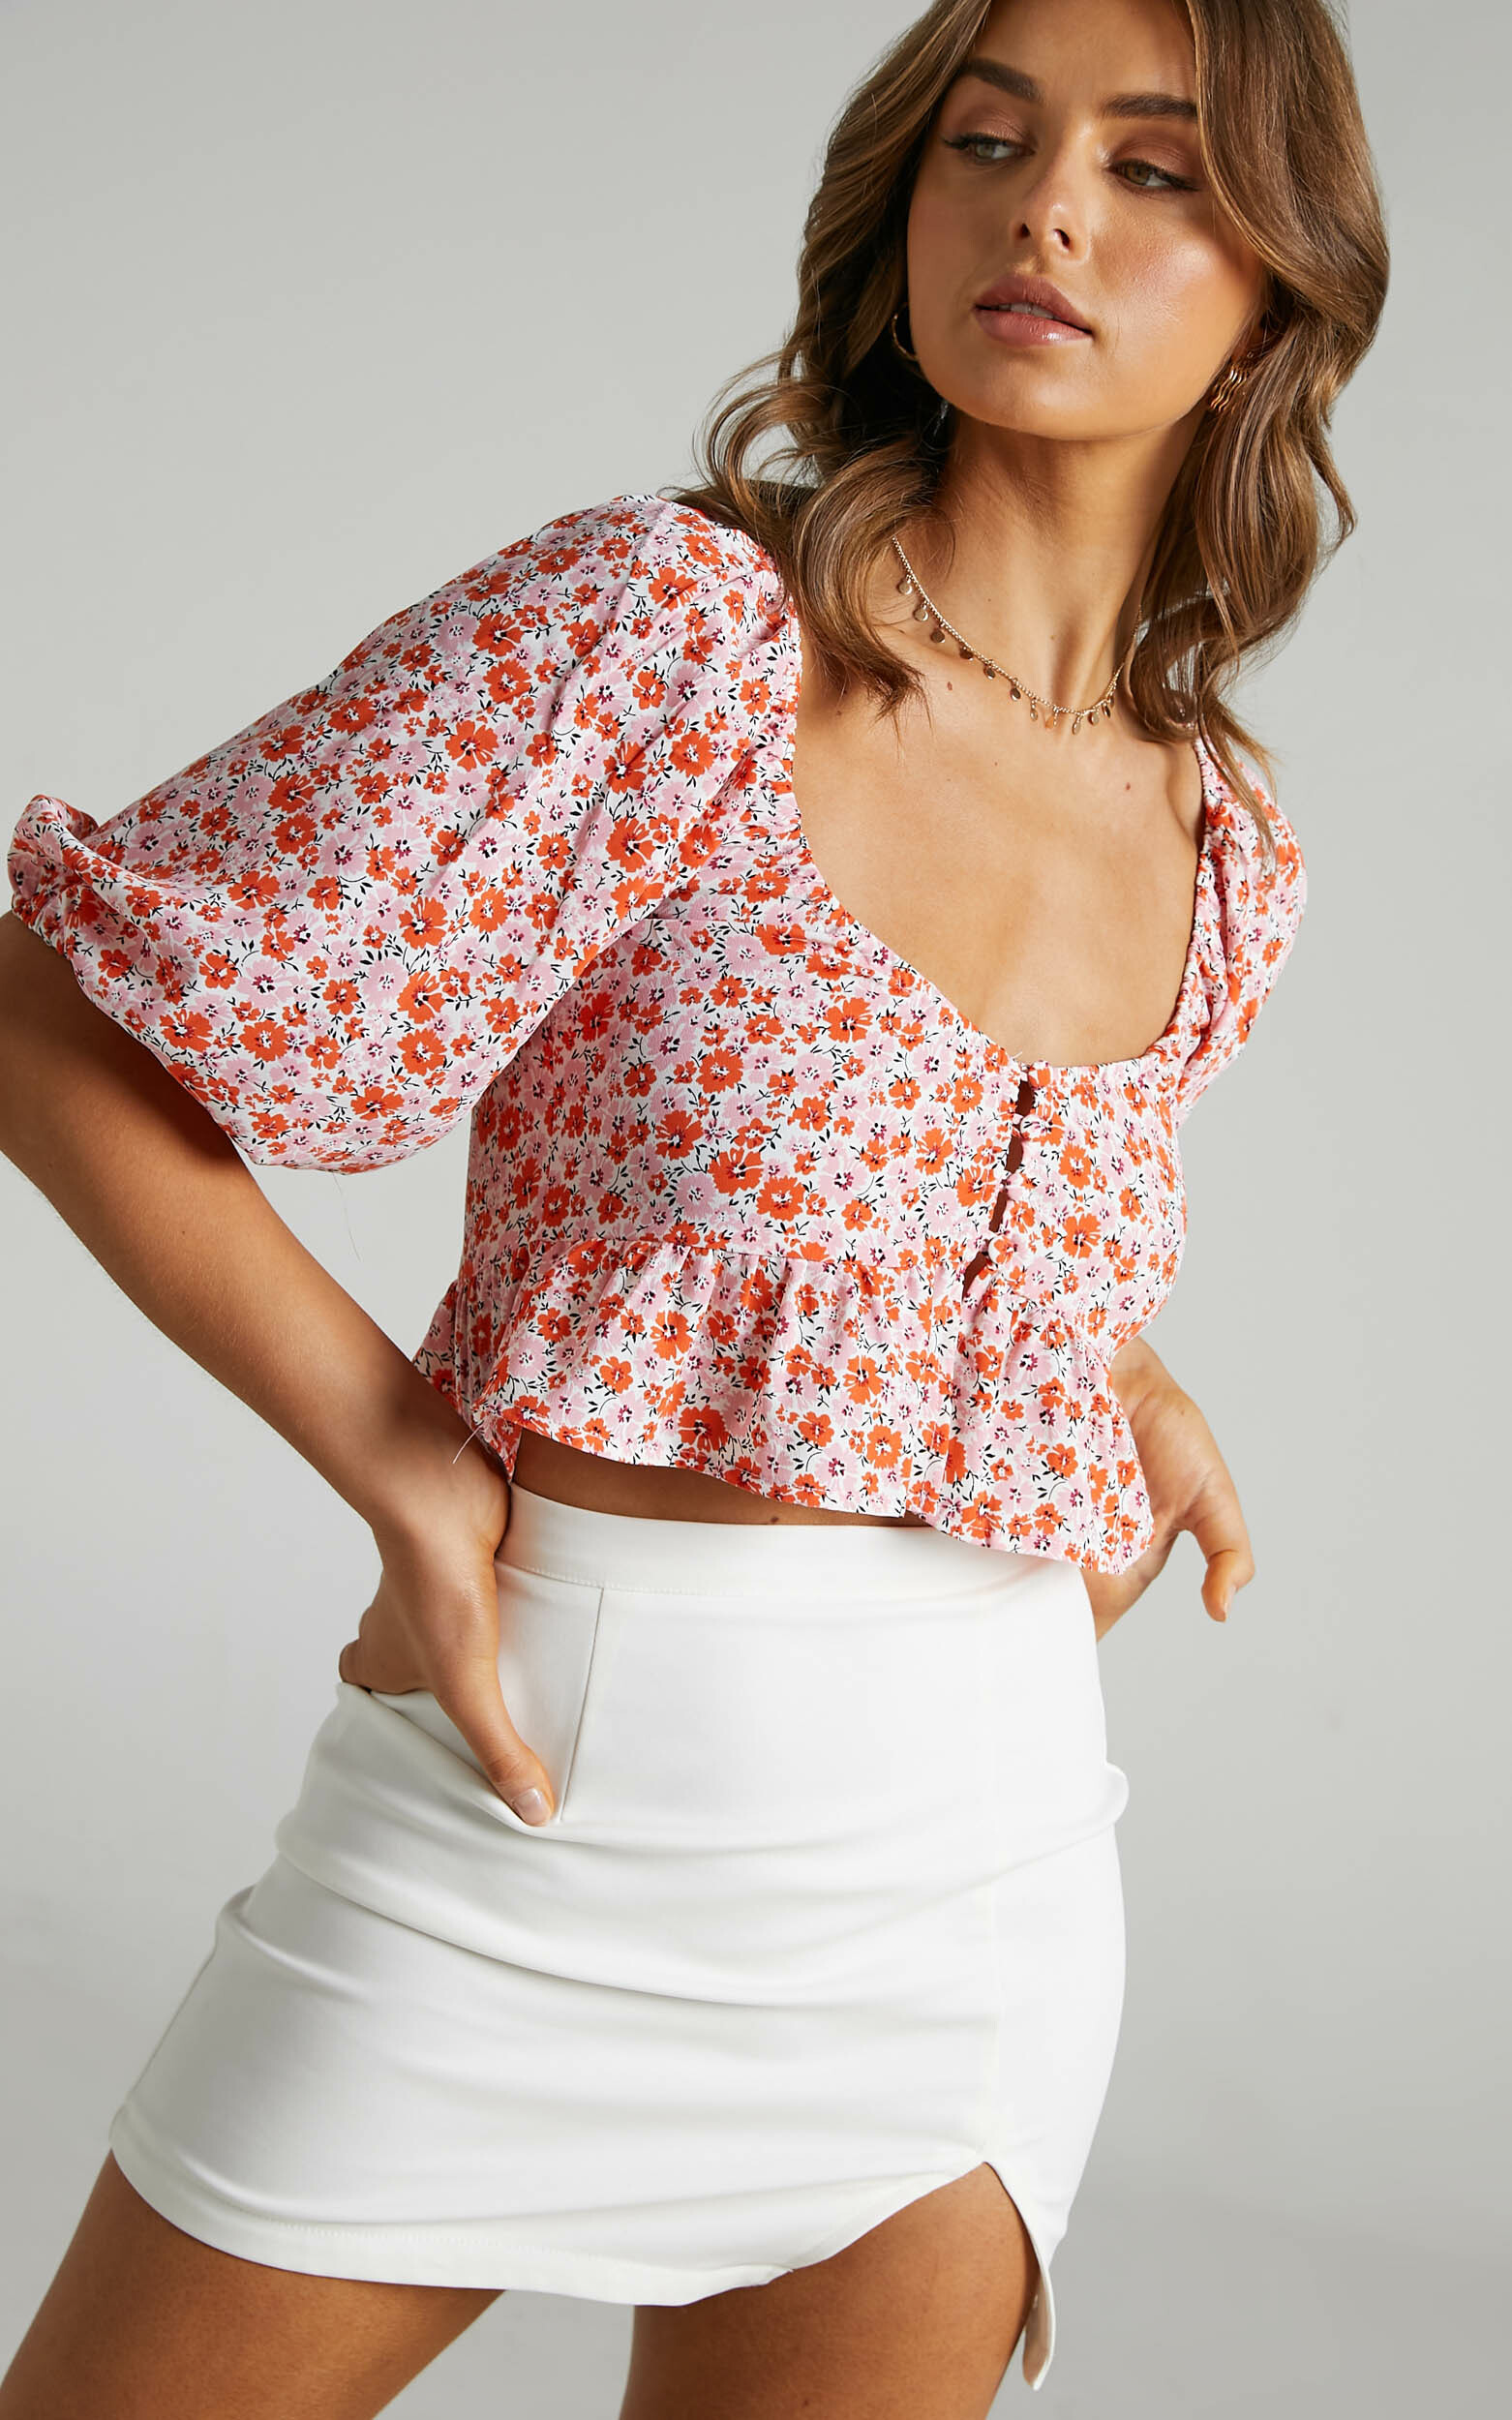 Daisee Button Up Short sleeve peplum Blouse in Pink Floral - 06, PNK1, hi-res image number null